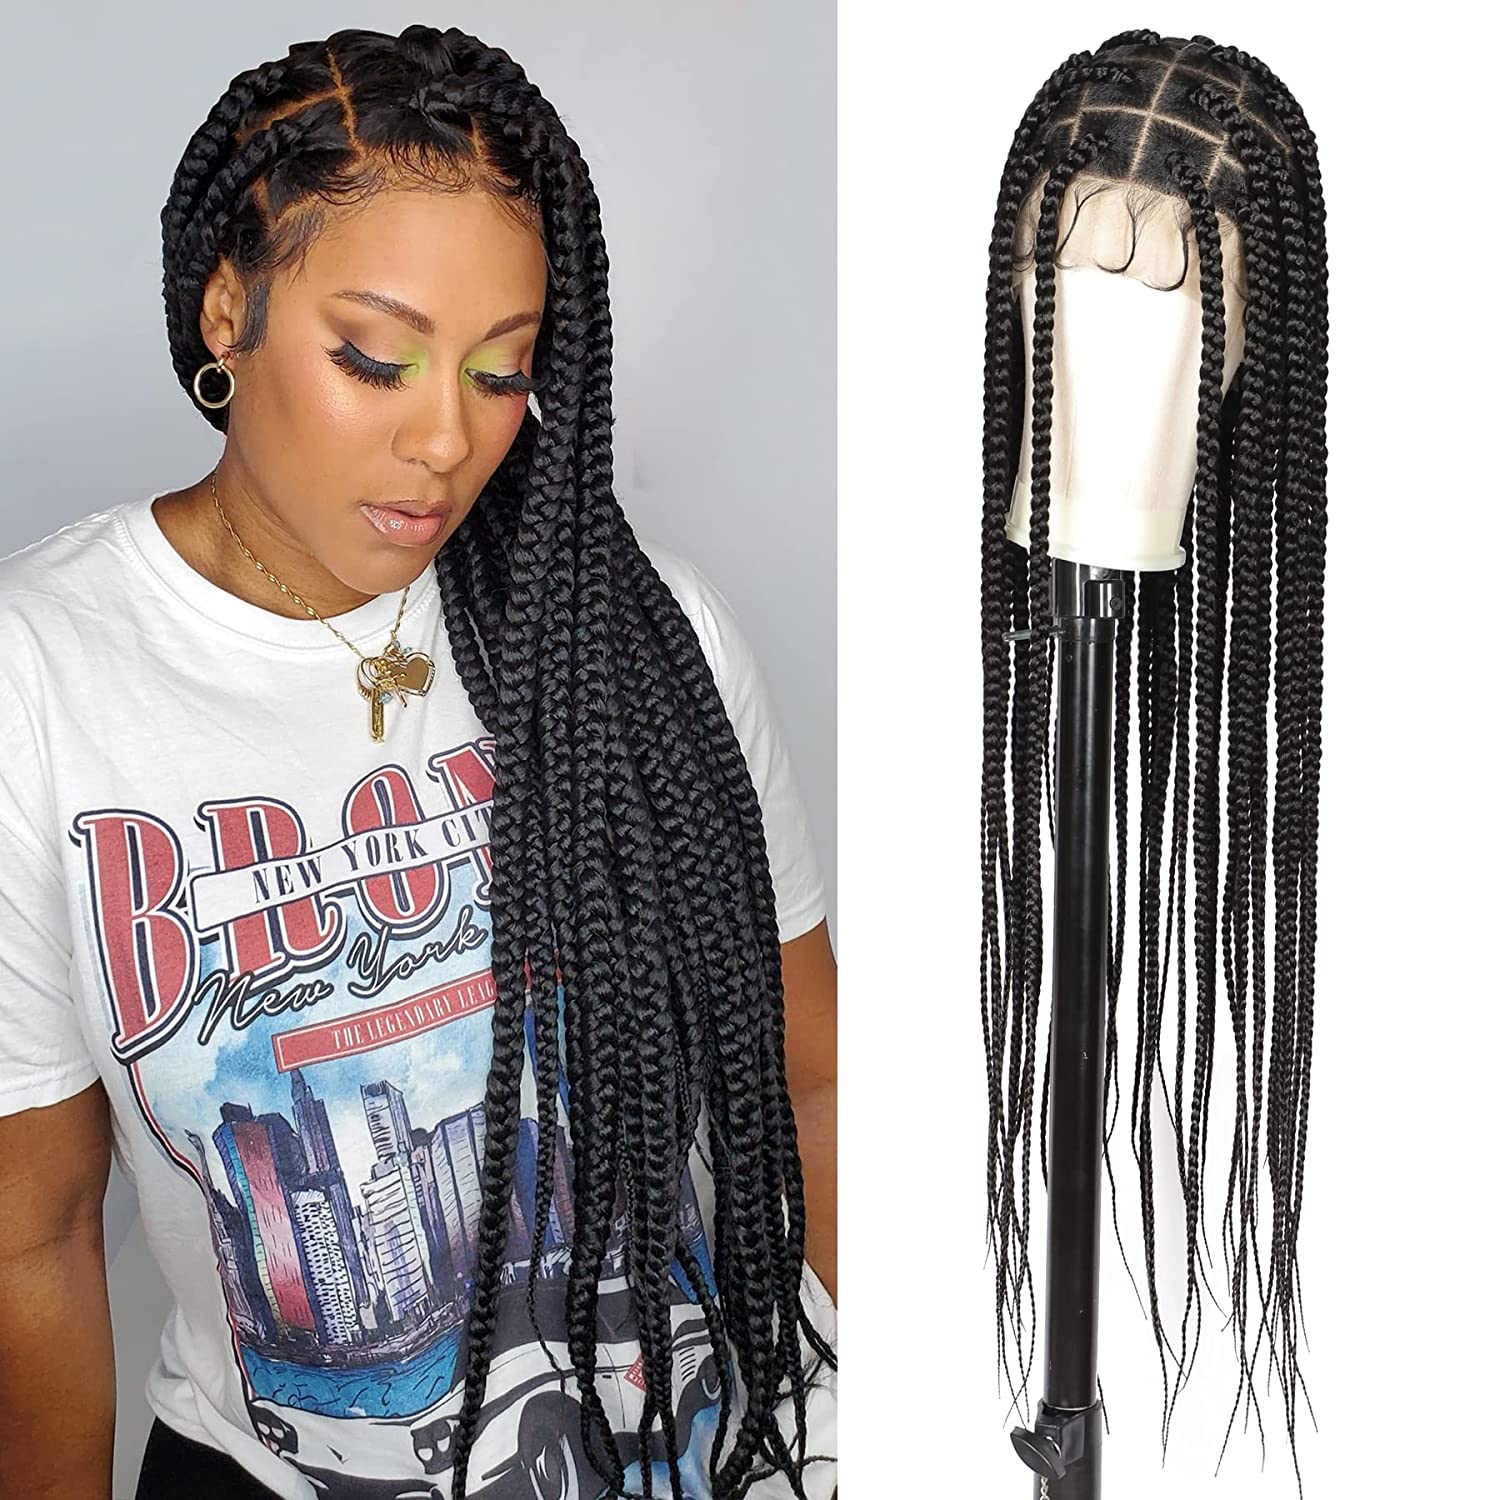  Fecihor 13x8 Inch HD Lace Front Cornrow Box Braided Wigs For  Women Braided Lace Front Wig With Baby Hair 36 Black Synthetic Box Braid  Wig Cornrow Braids Wigs : Beauty